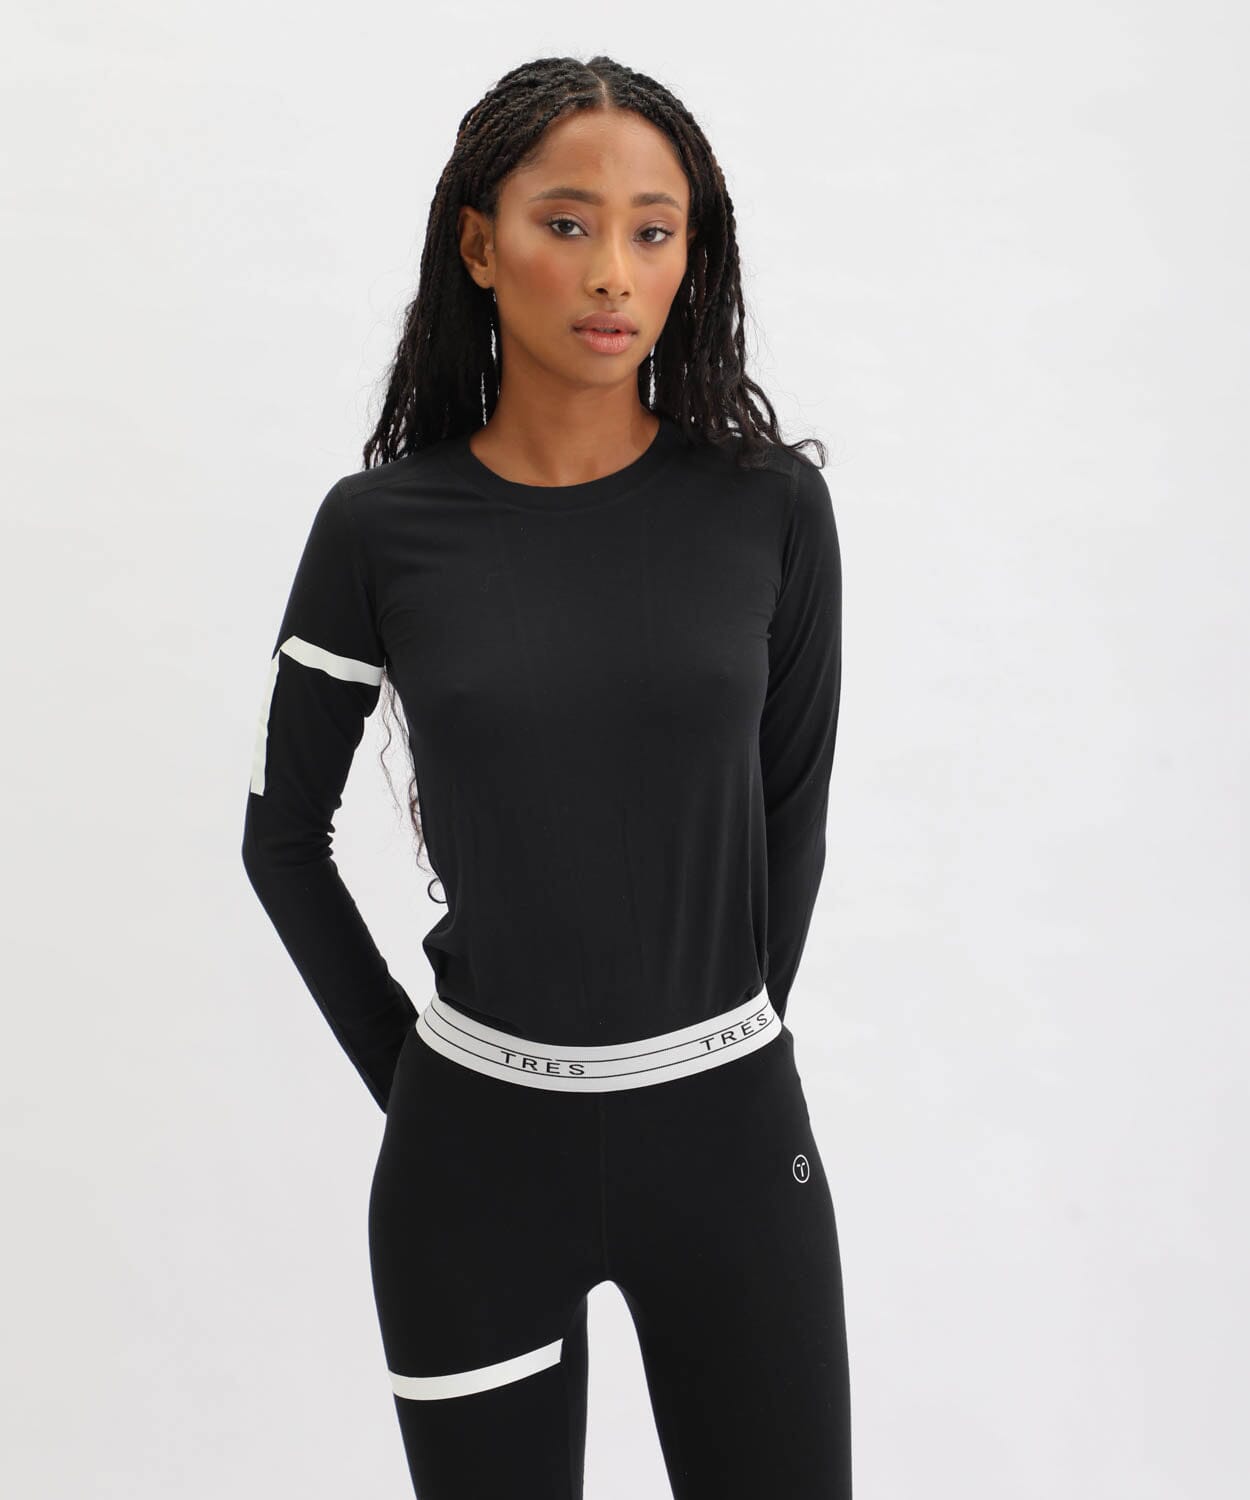 Base Layer | Icecold Tights - Black & Offwhite